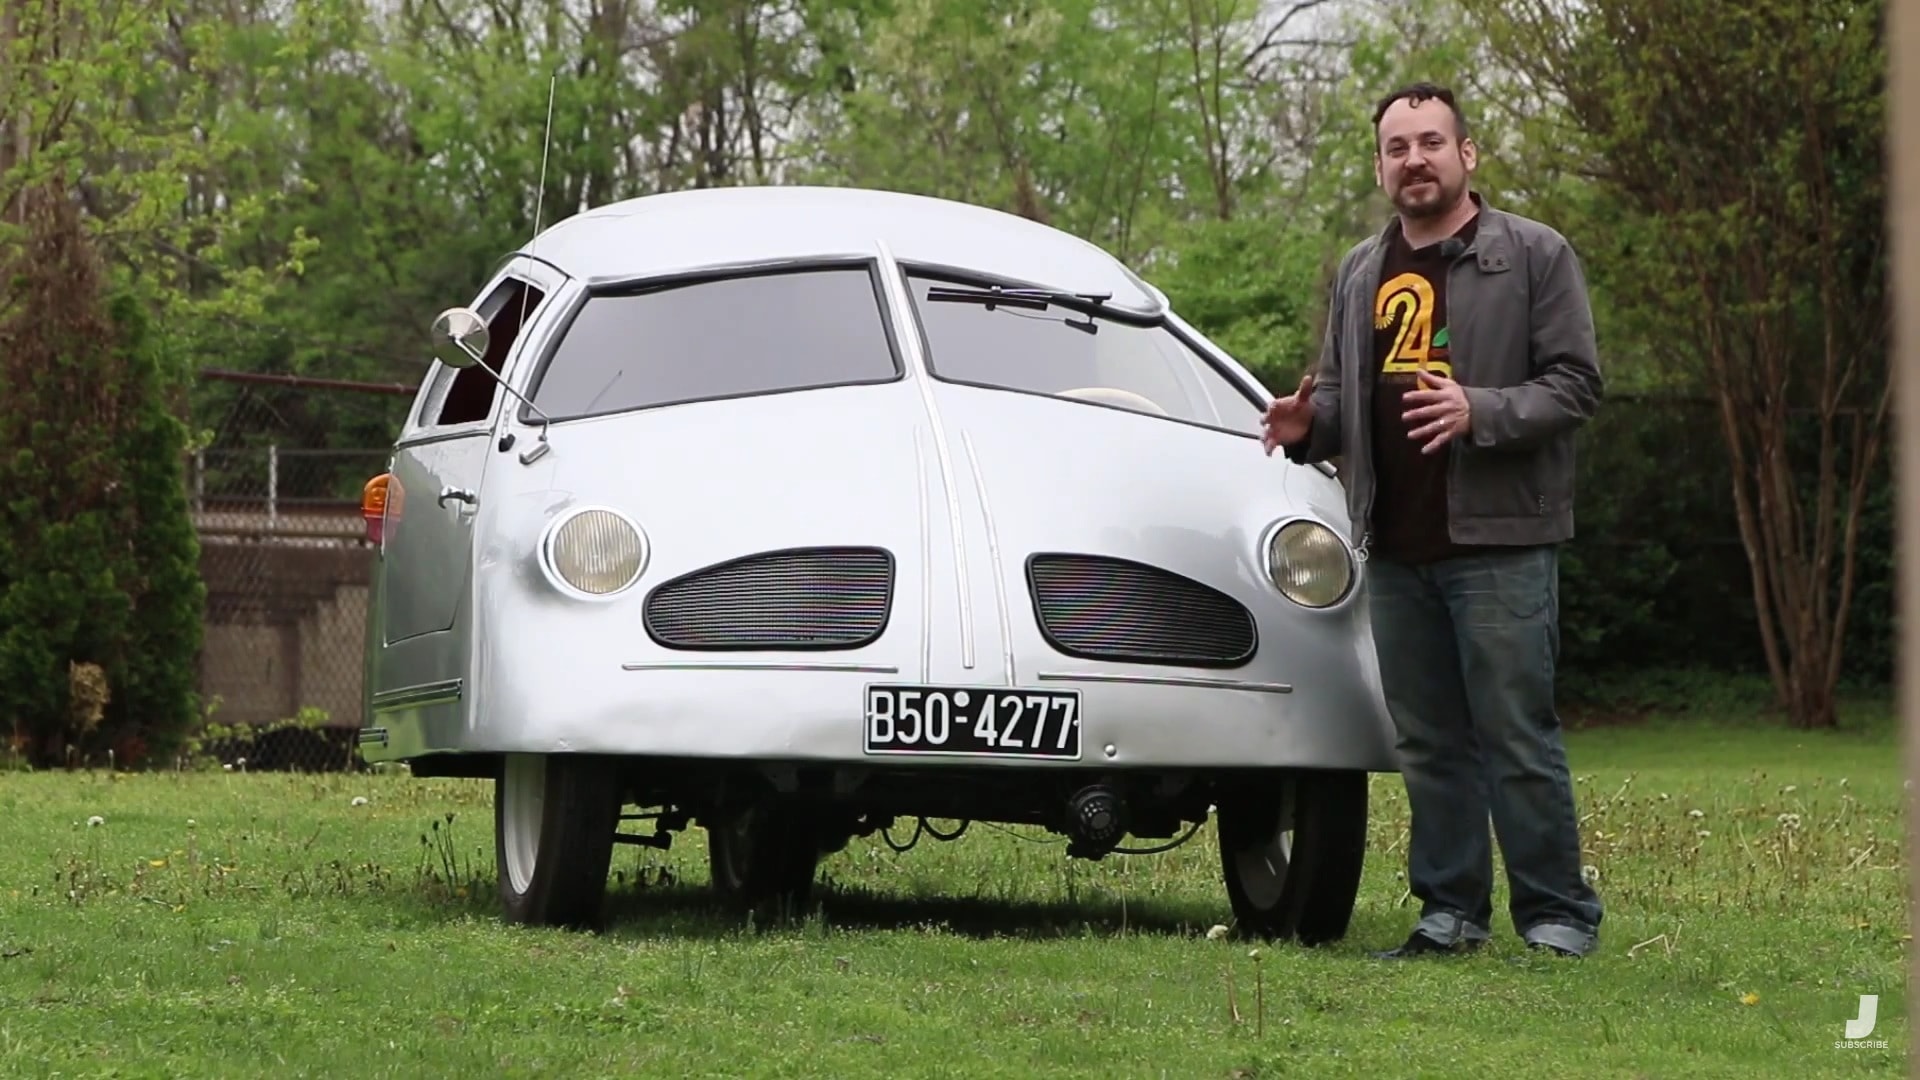 http://s1.cdn.autoevolution.com/images/news/this-is-what-it-s-like-to-drive-the-worst-car-in-the-world-the-hoffmann-video-100842_1.jpg